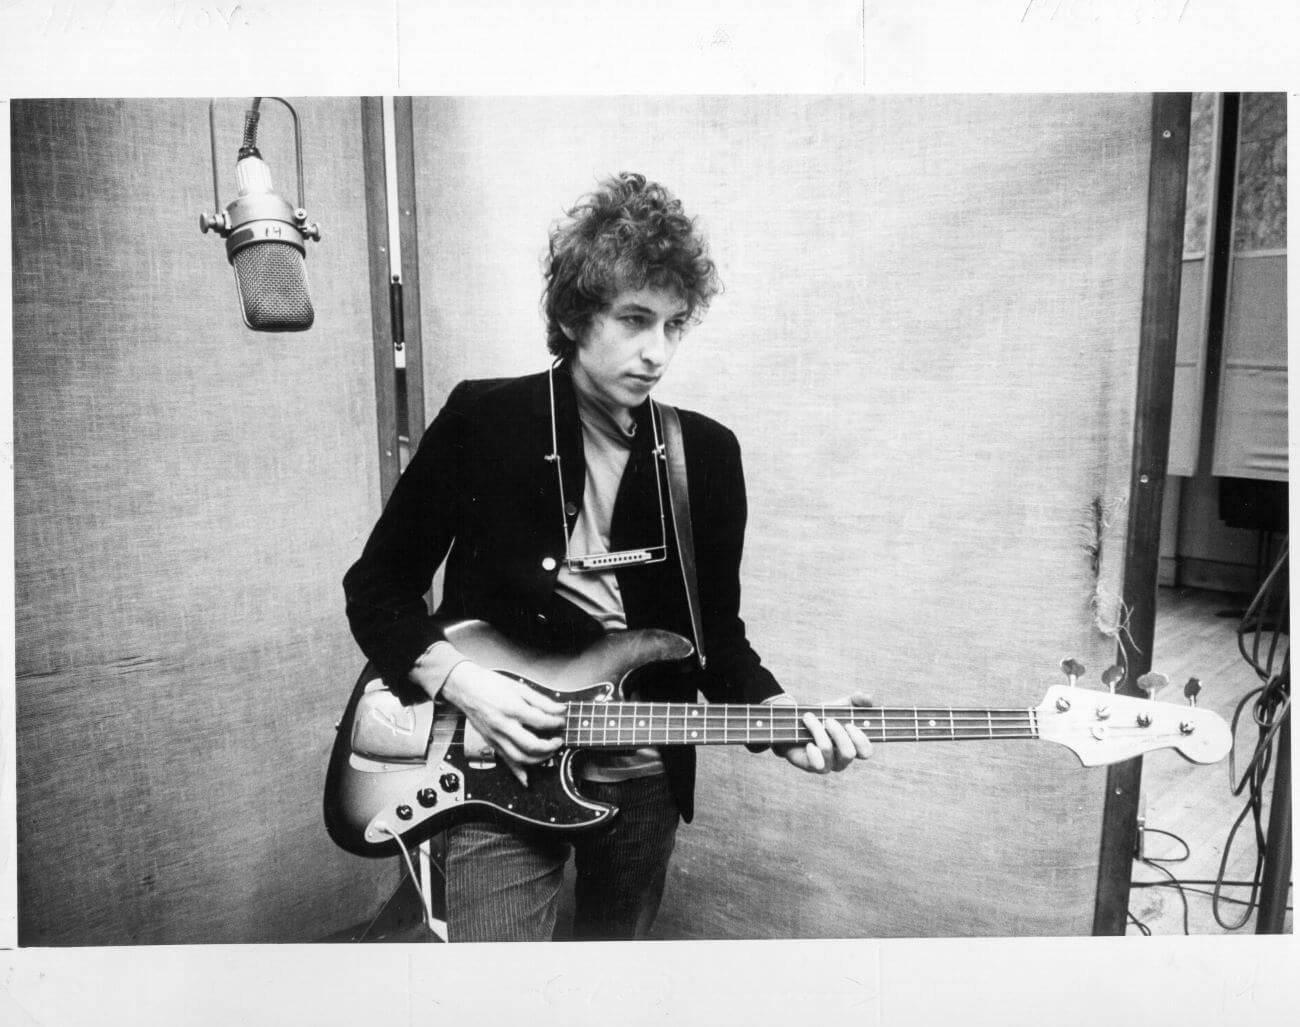 A black and white picture of Bob Dylan standing near a microphone and holding a guitar.